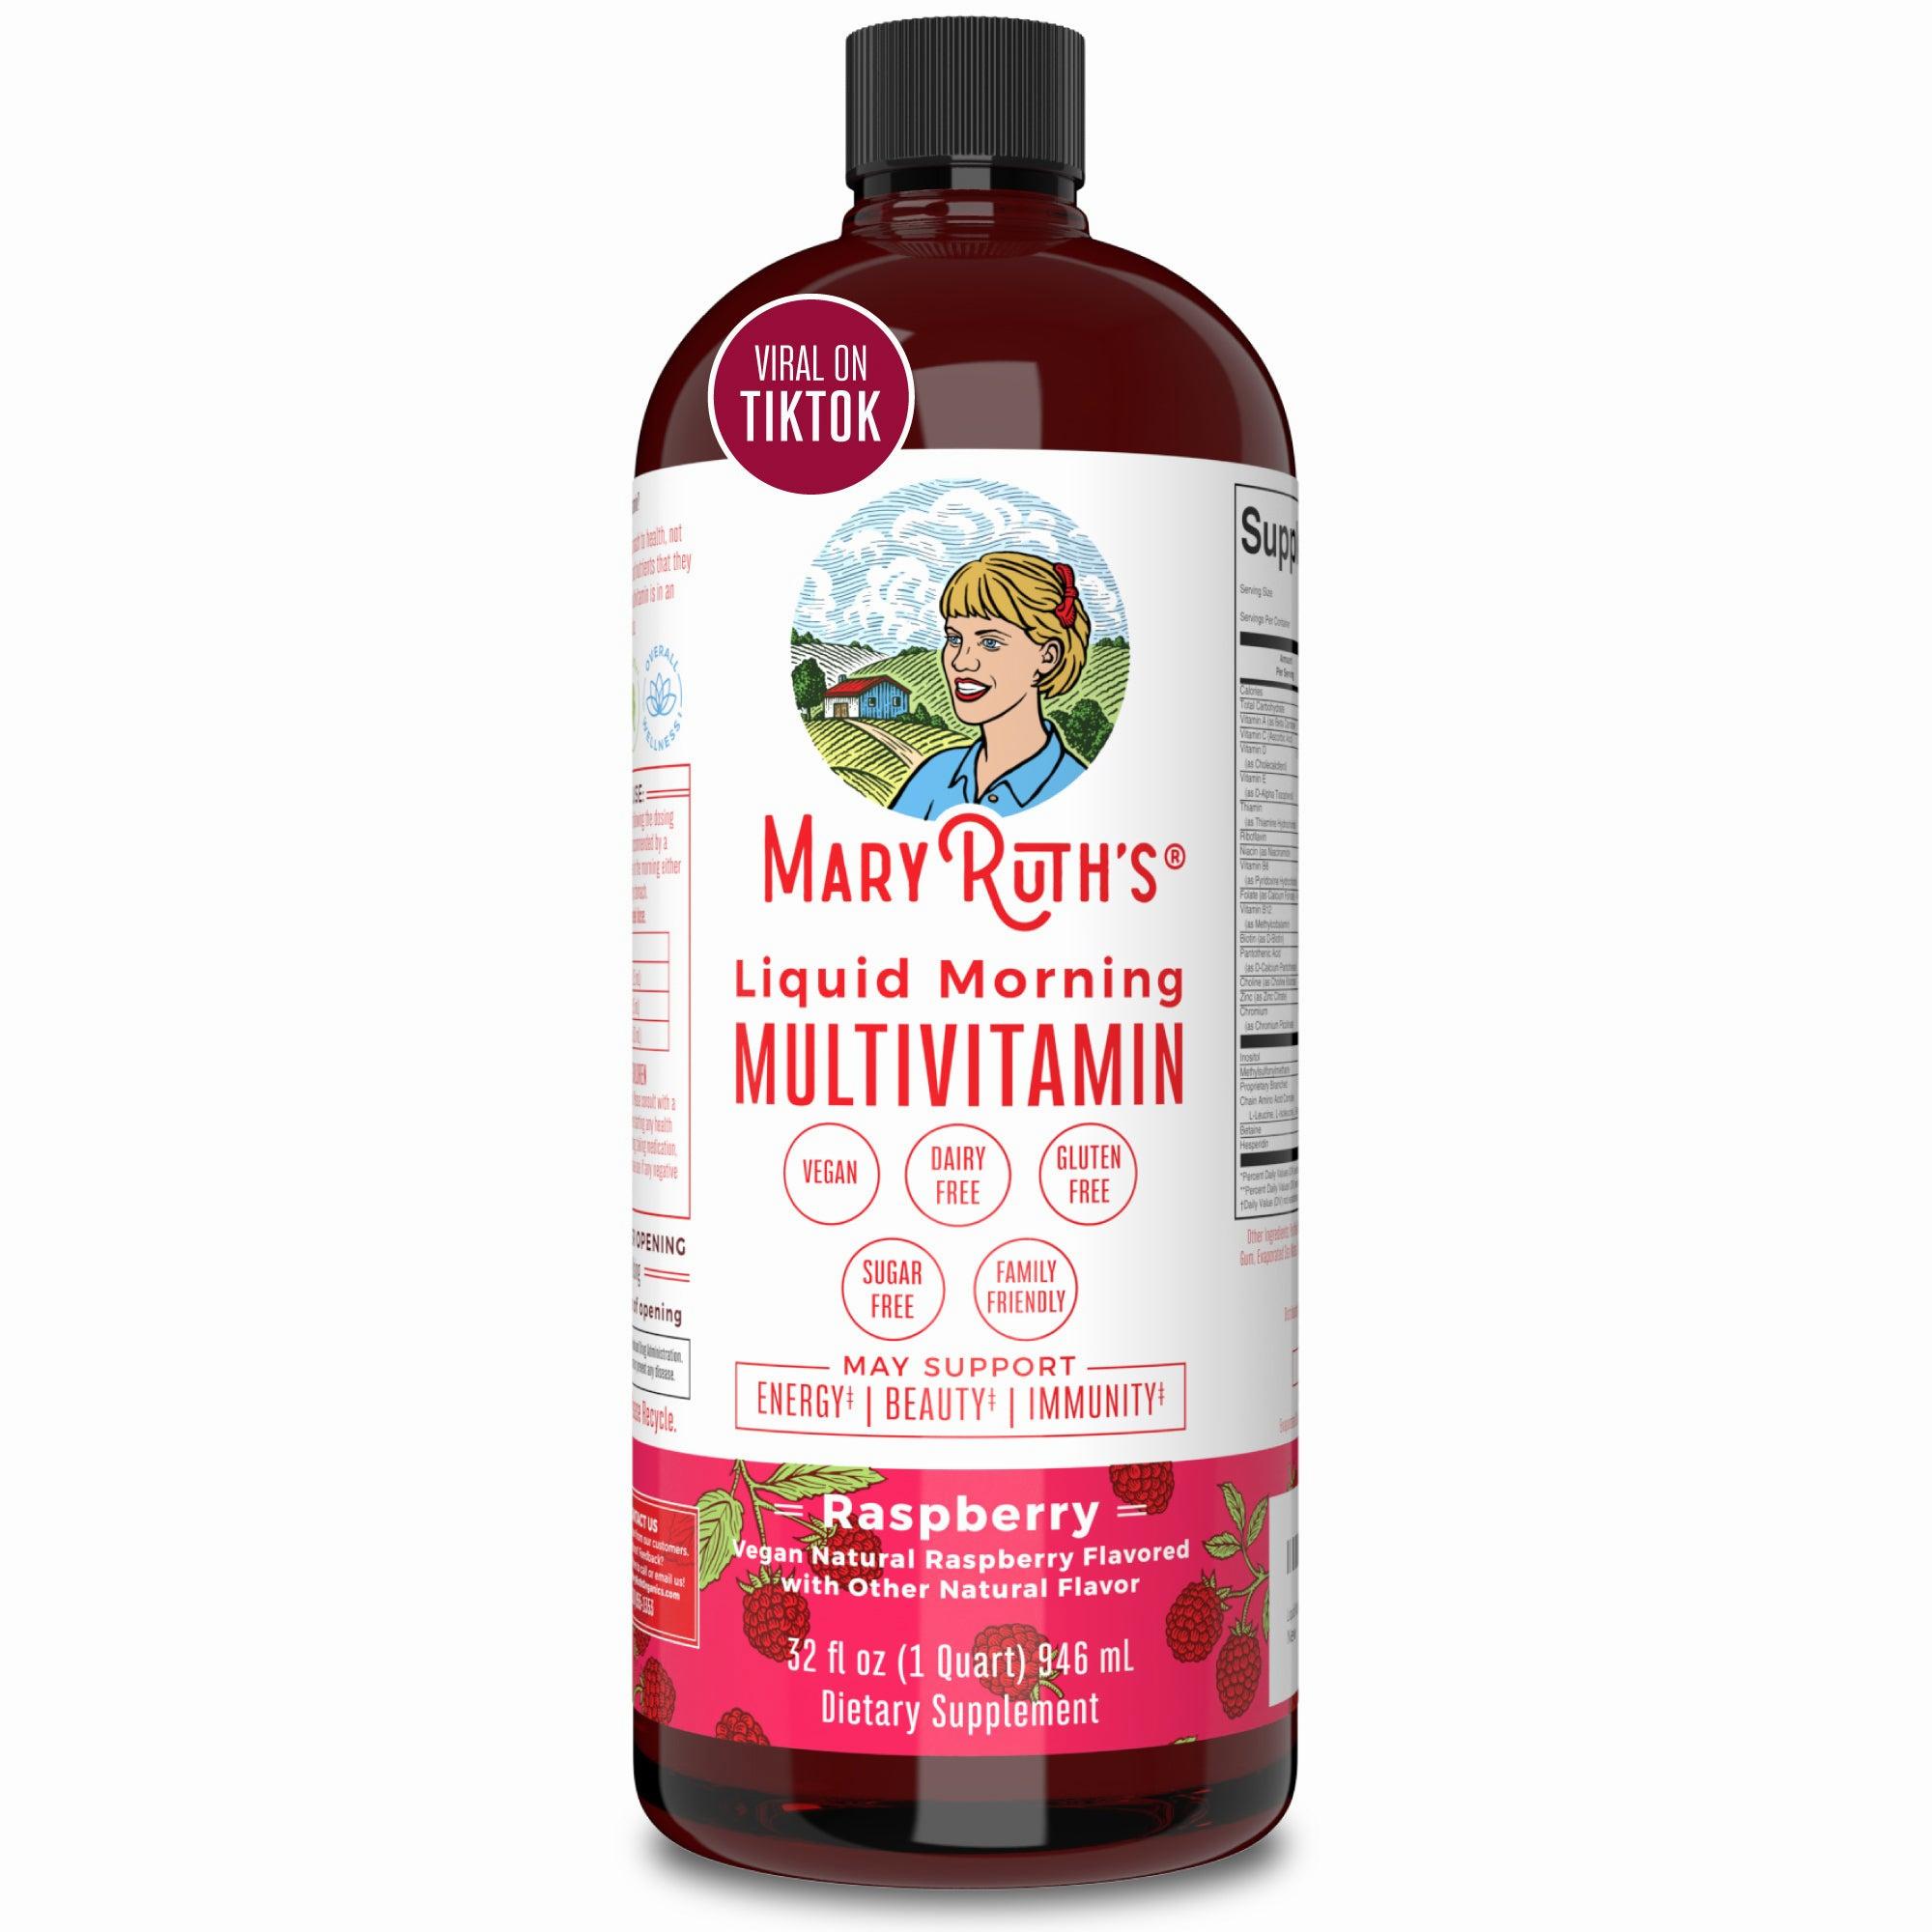 A bottle of Mary Ruths Liquid Morning Multivitamin in raspberry flavor, which is vegan, dairy-free, gluten-free, and sugar-free.